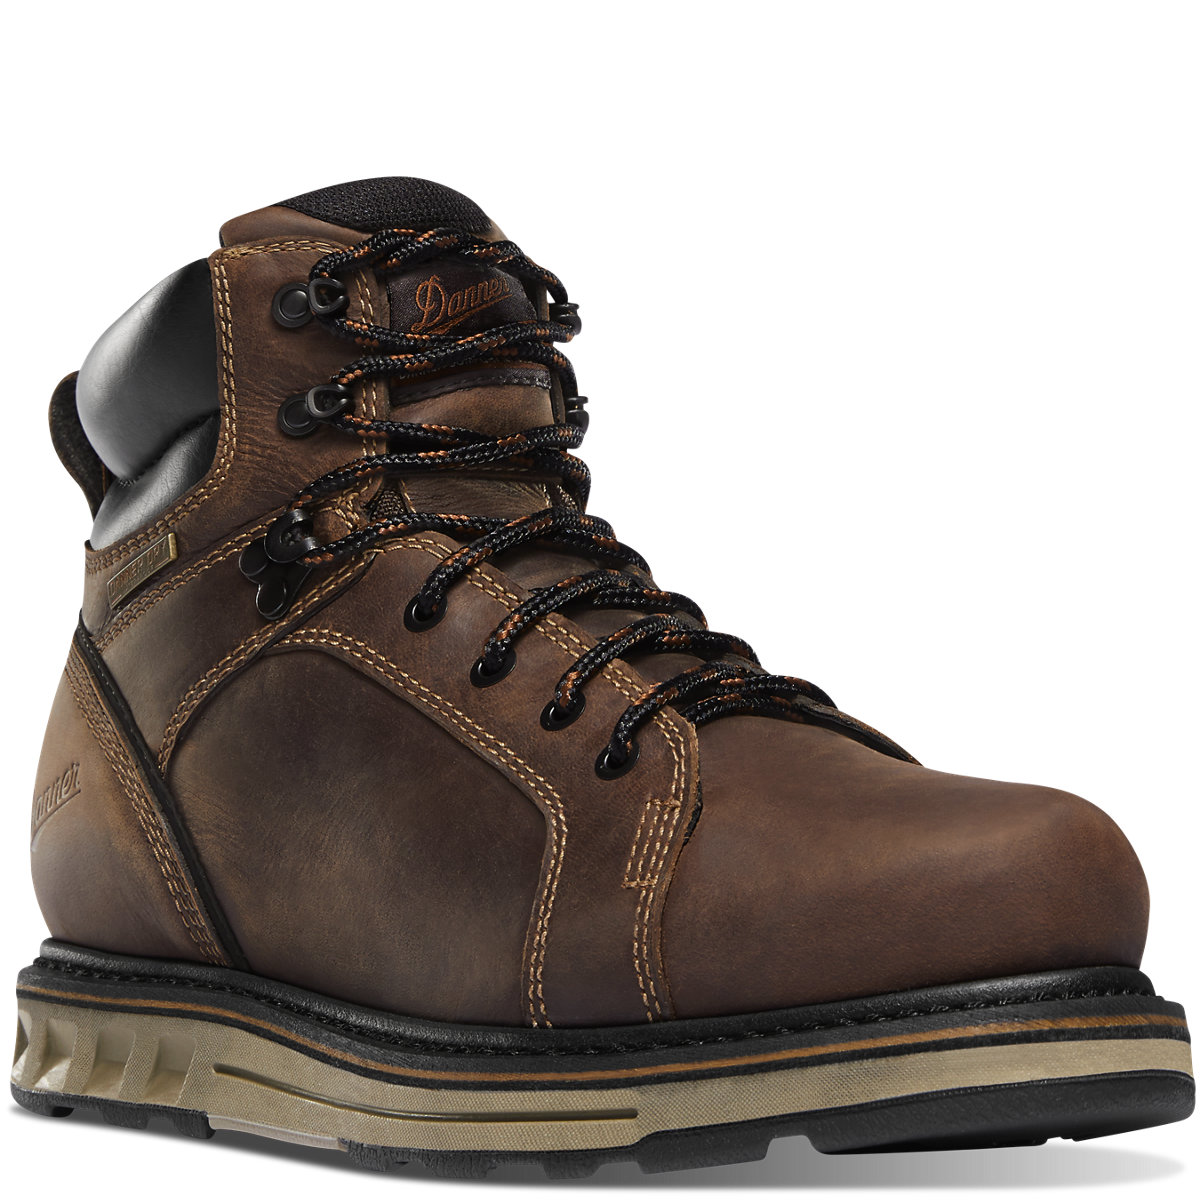 Lacrosse Men's Steel Yard 6 Inch Work Boots with Steel Toe from Columbia Safety